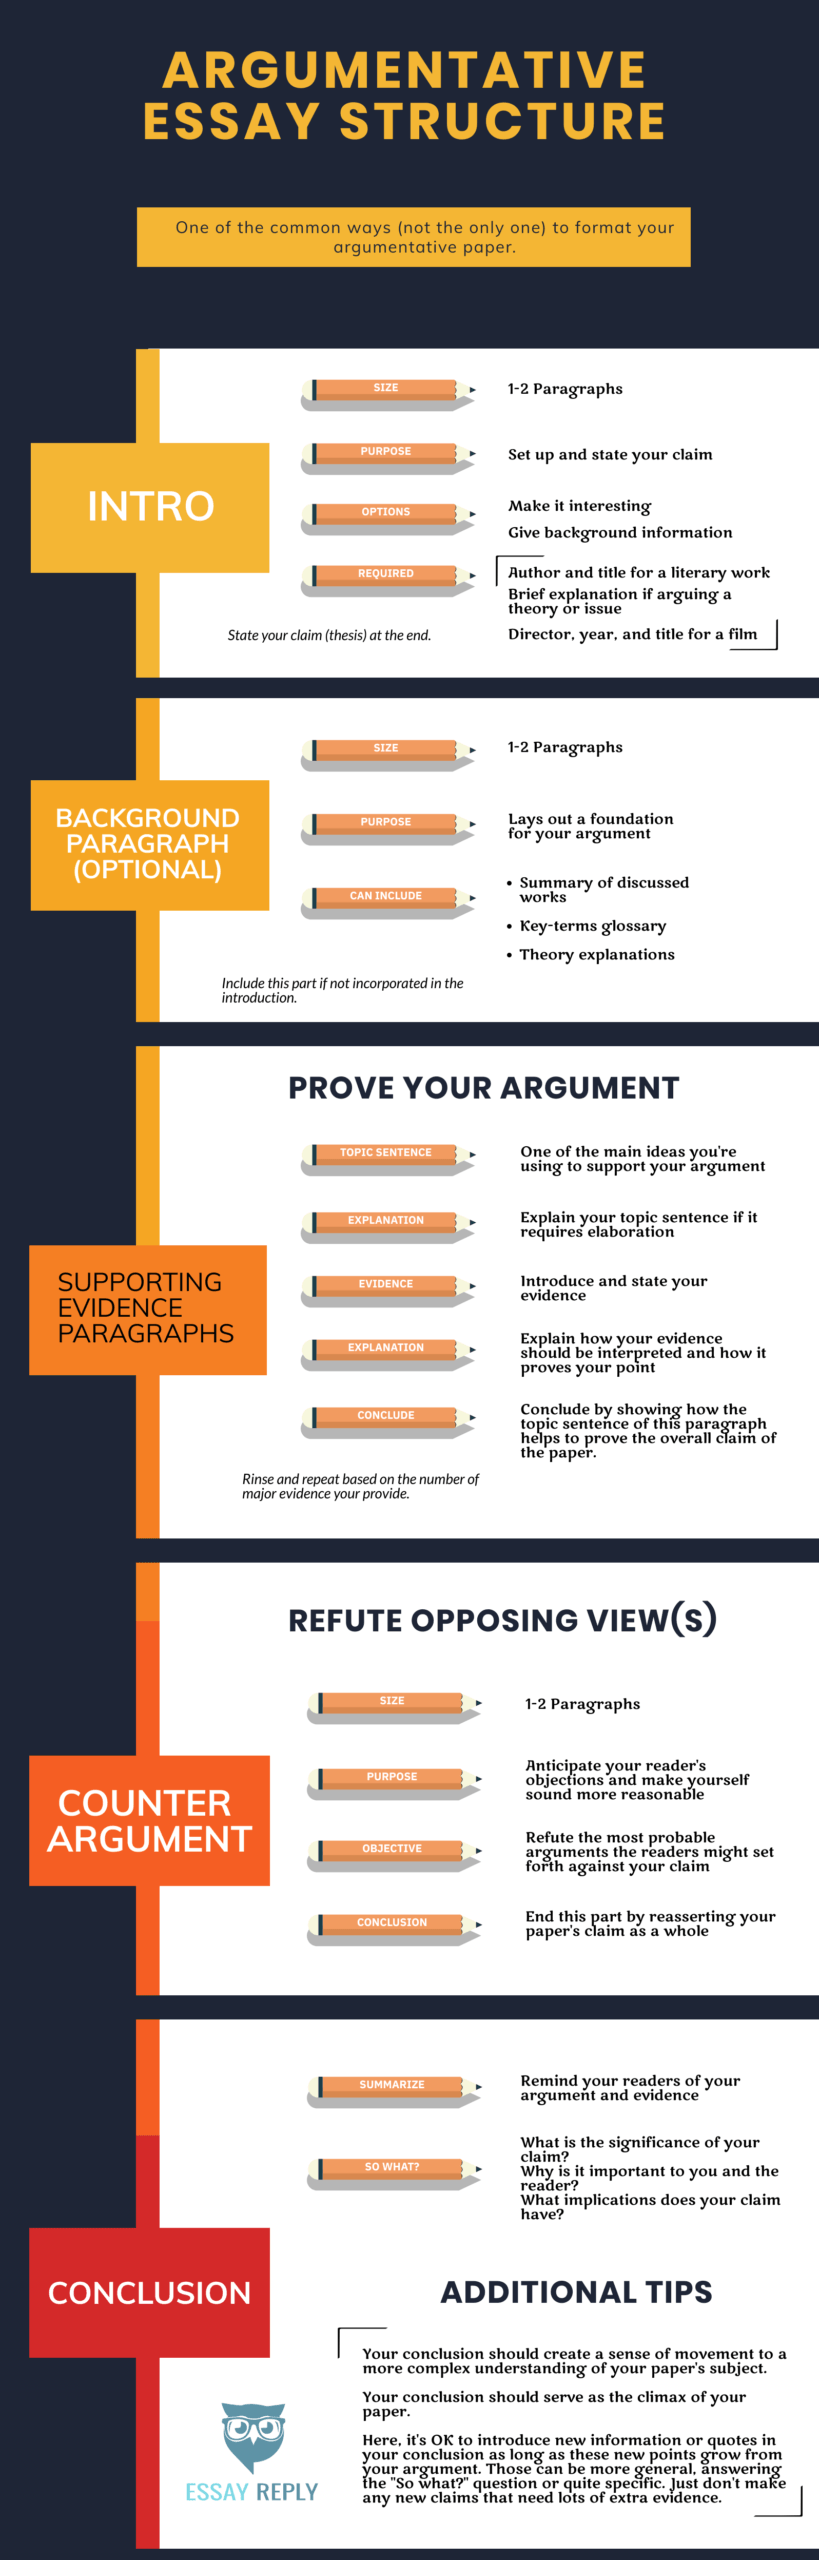 A detailed infographic showing how a student can structure an argumentative essay